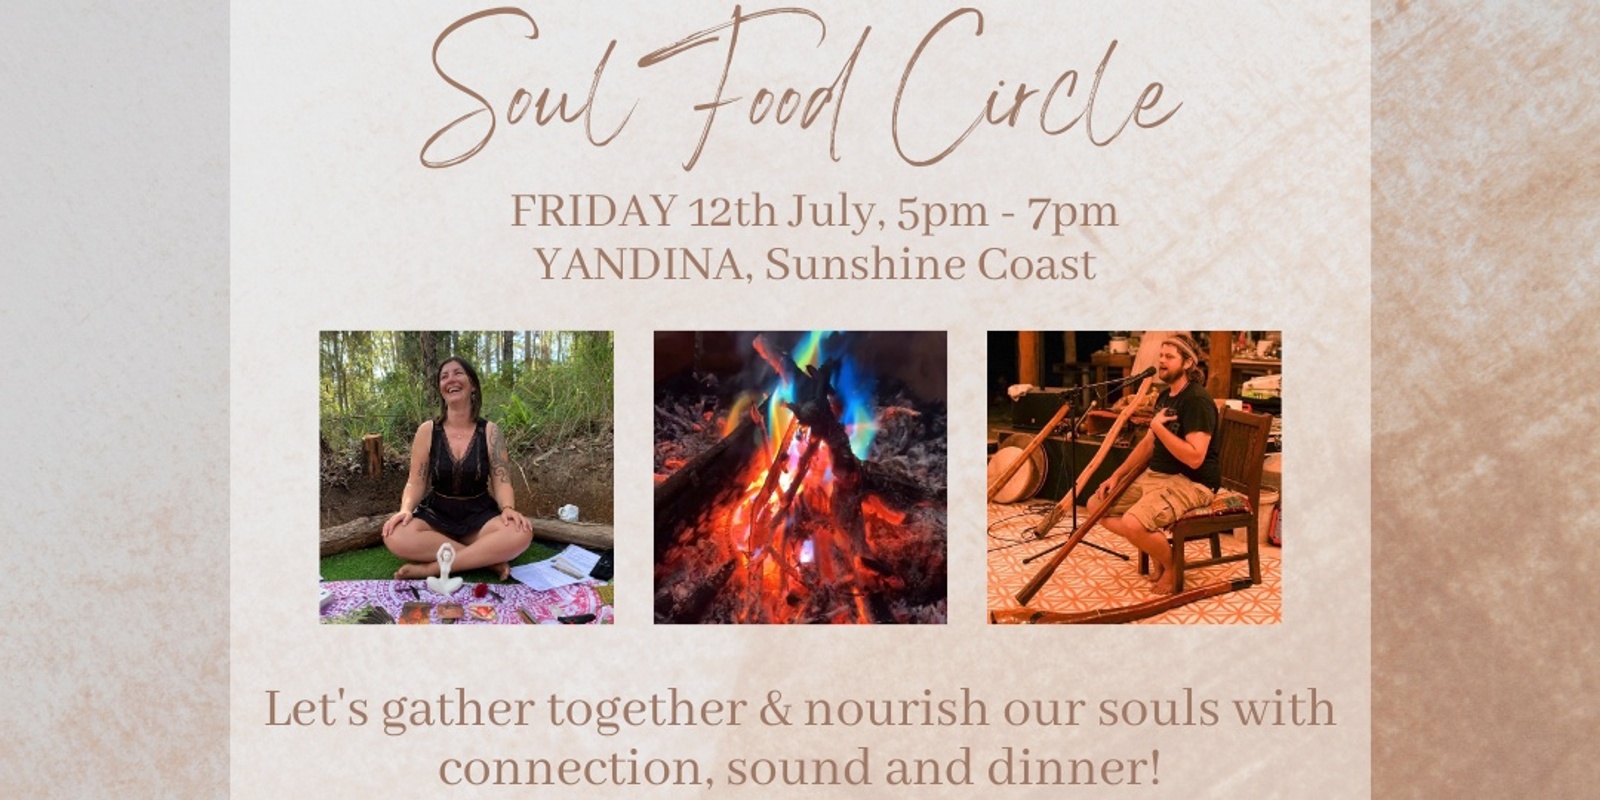 Banner image for SoulFood Circle